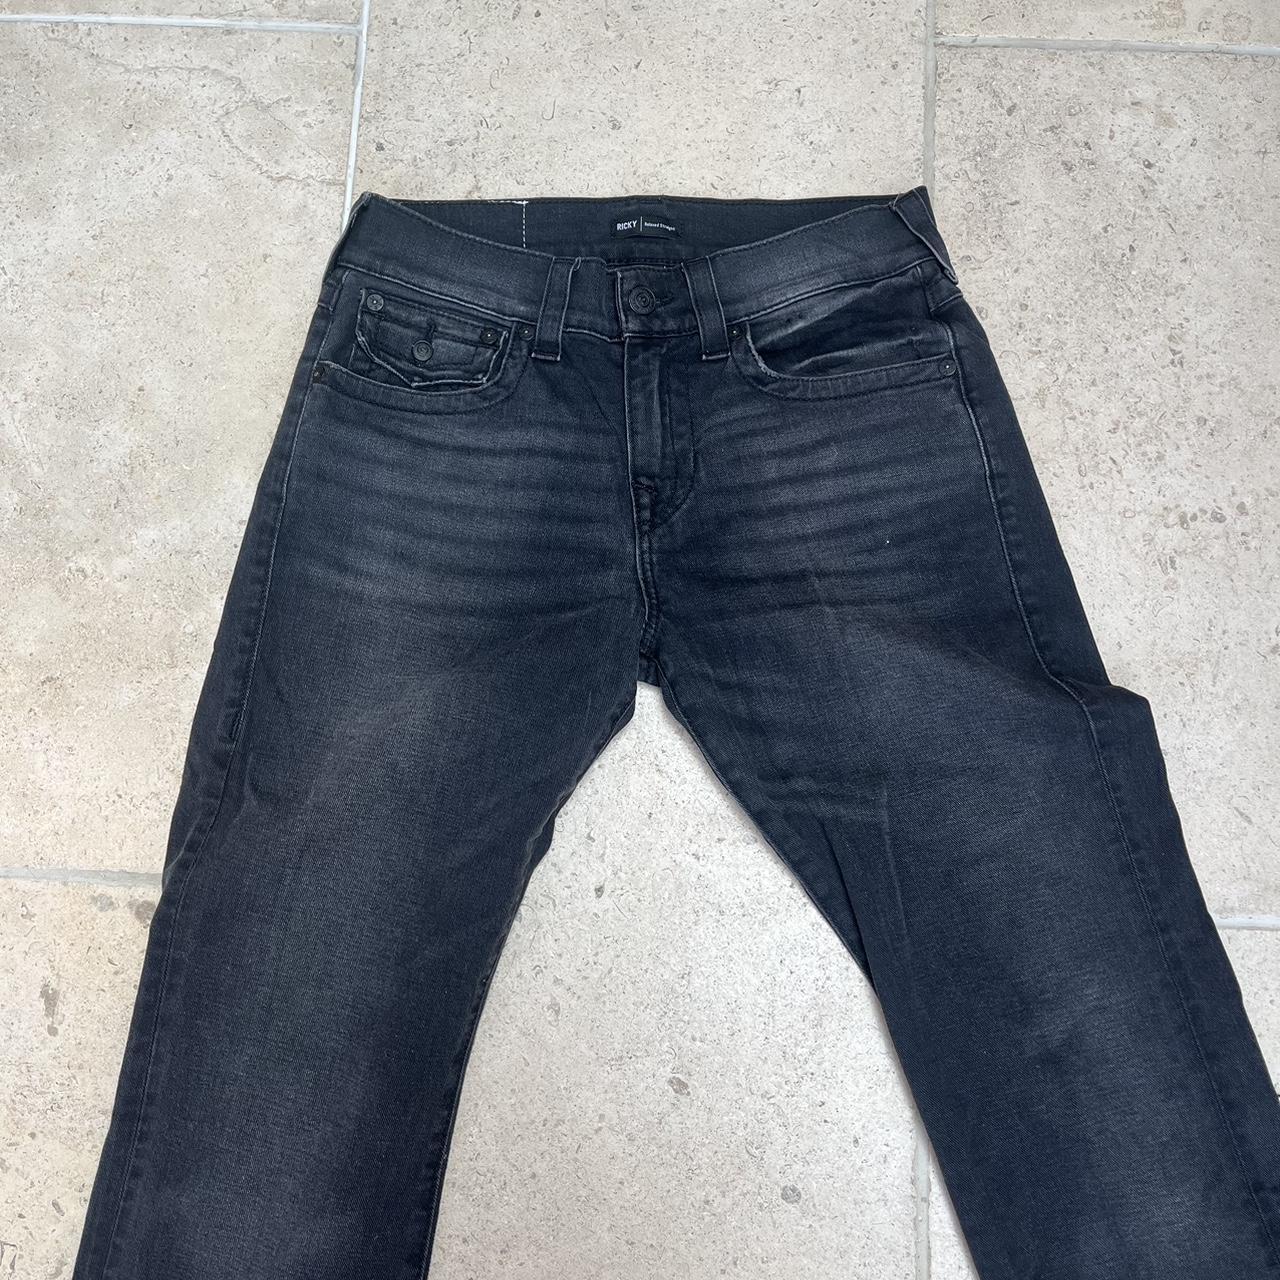 True religion jeans In the style ‘Ricky’ - Depop